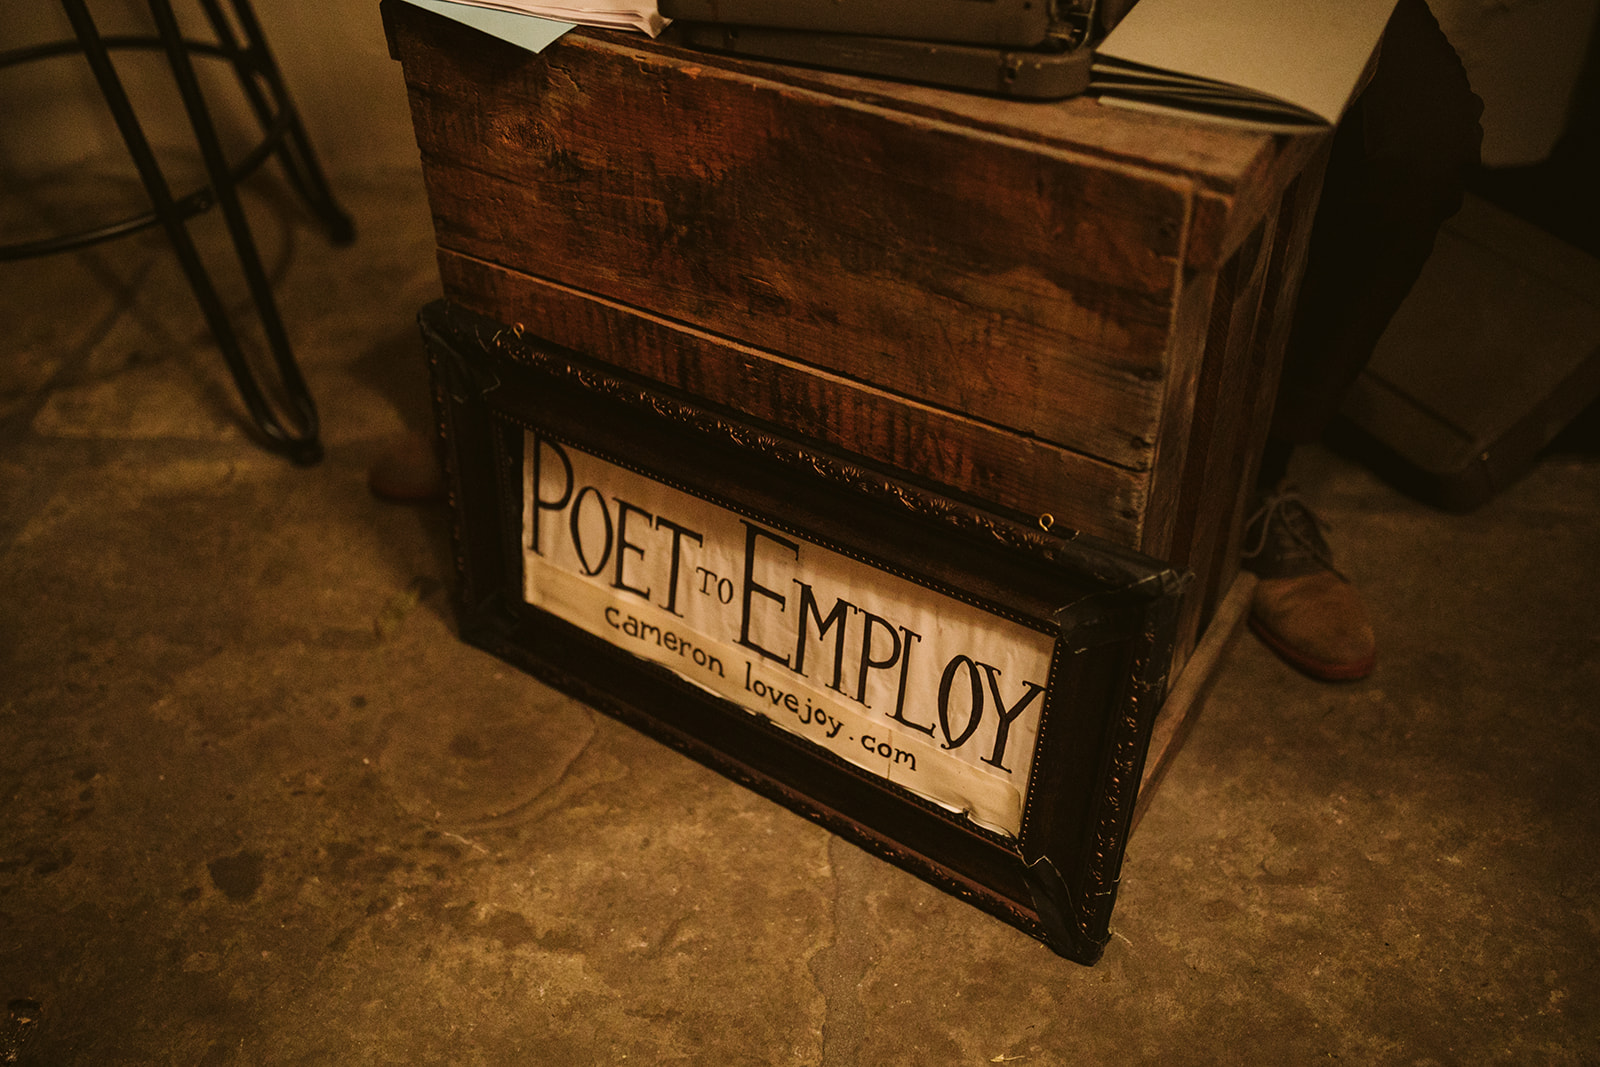 Private Poet for Hire